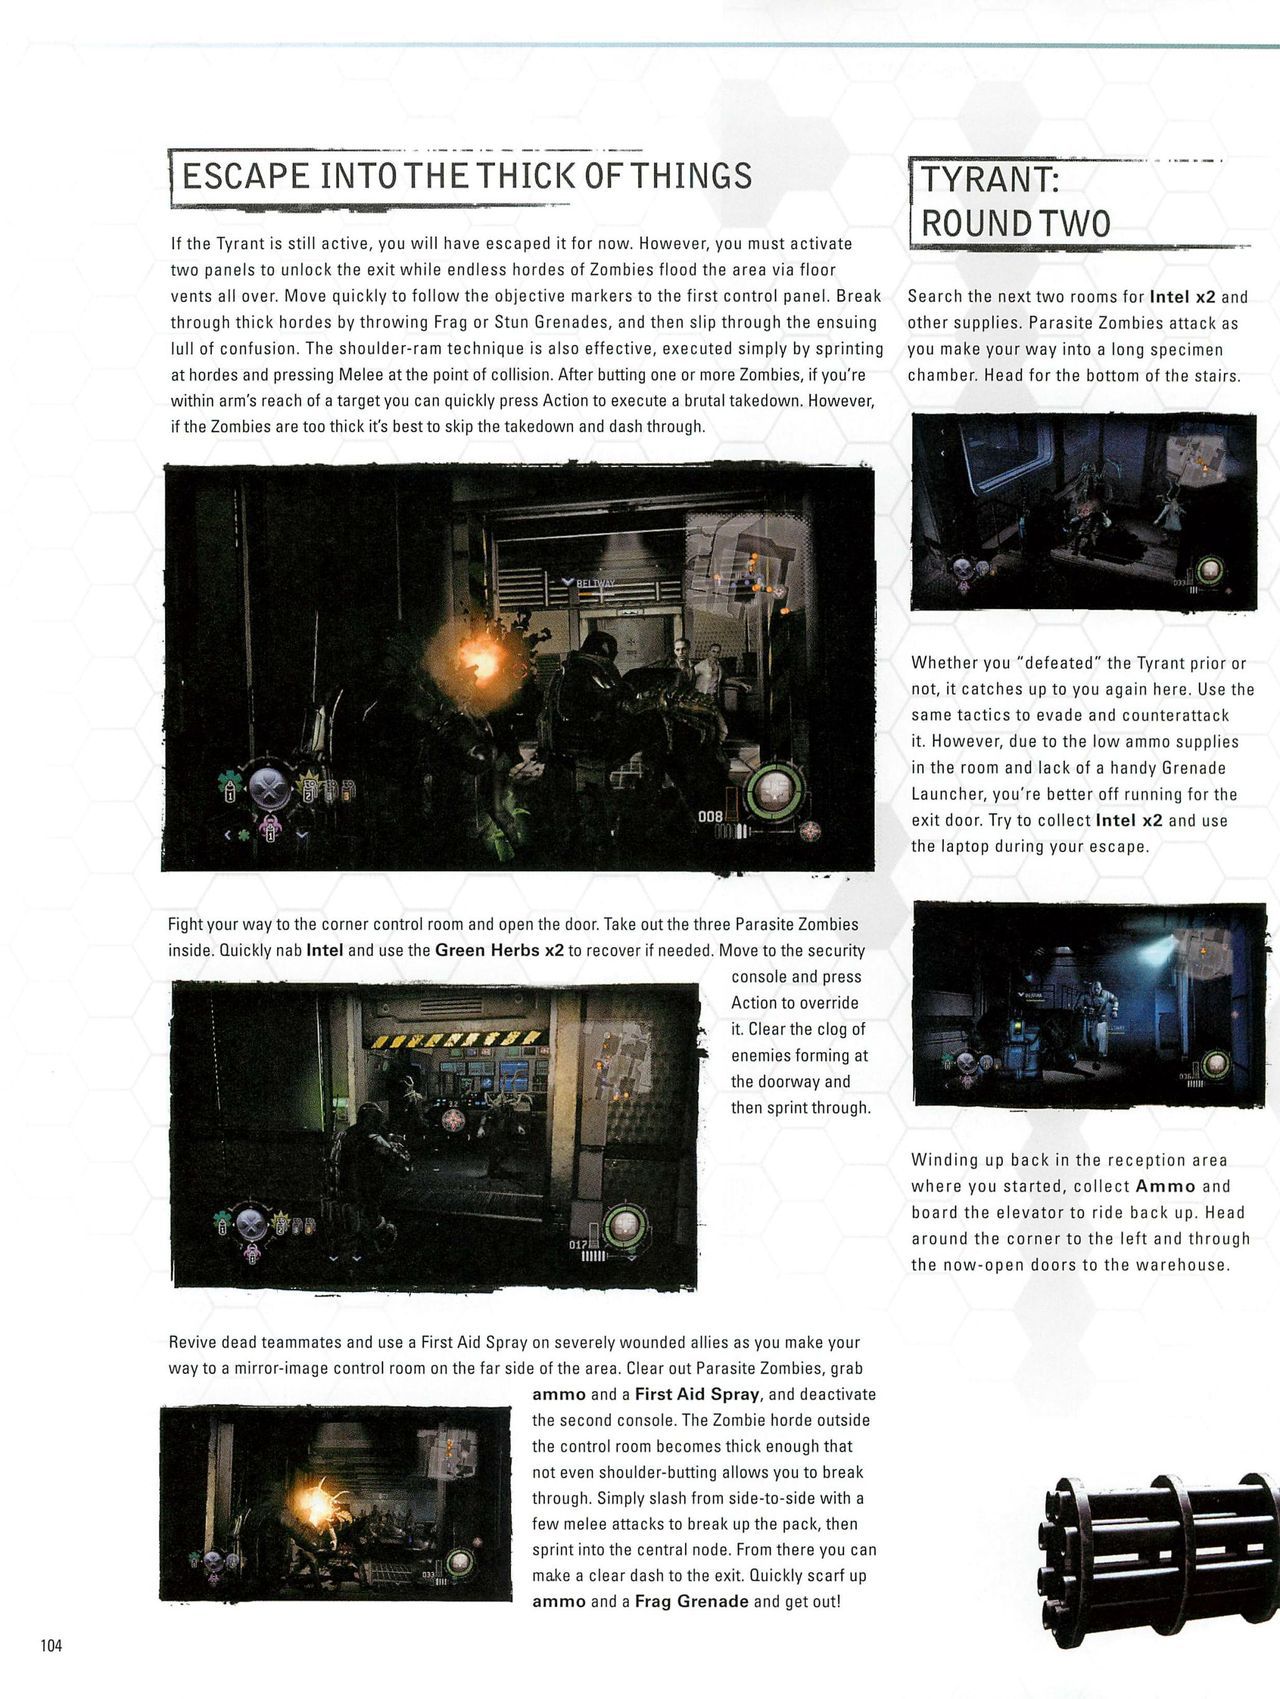 Resident Evil: Operation Raccoon City Official Strategy Guide (watermarked) 106